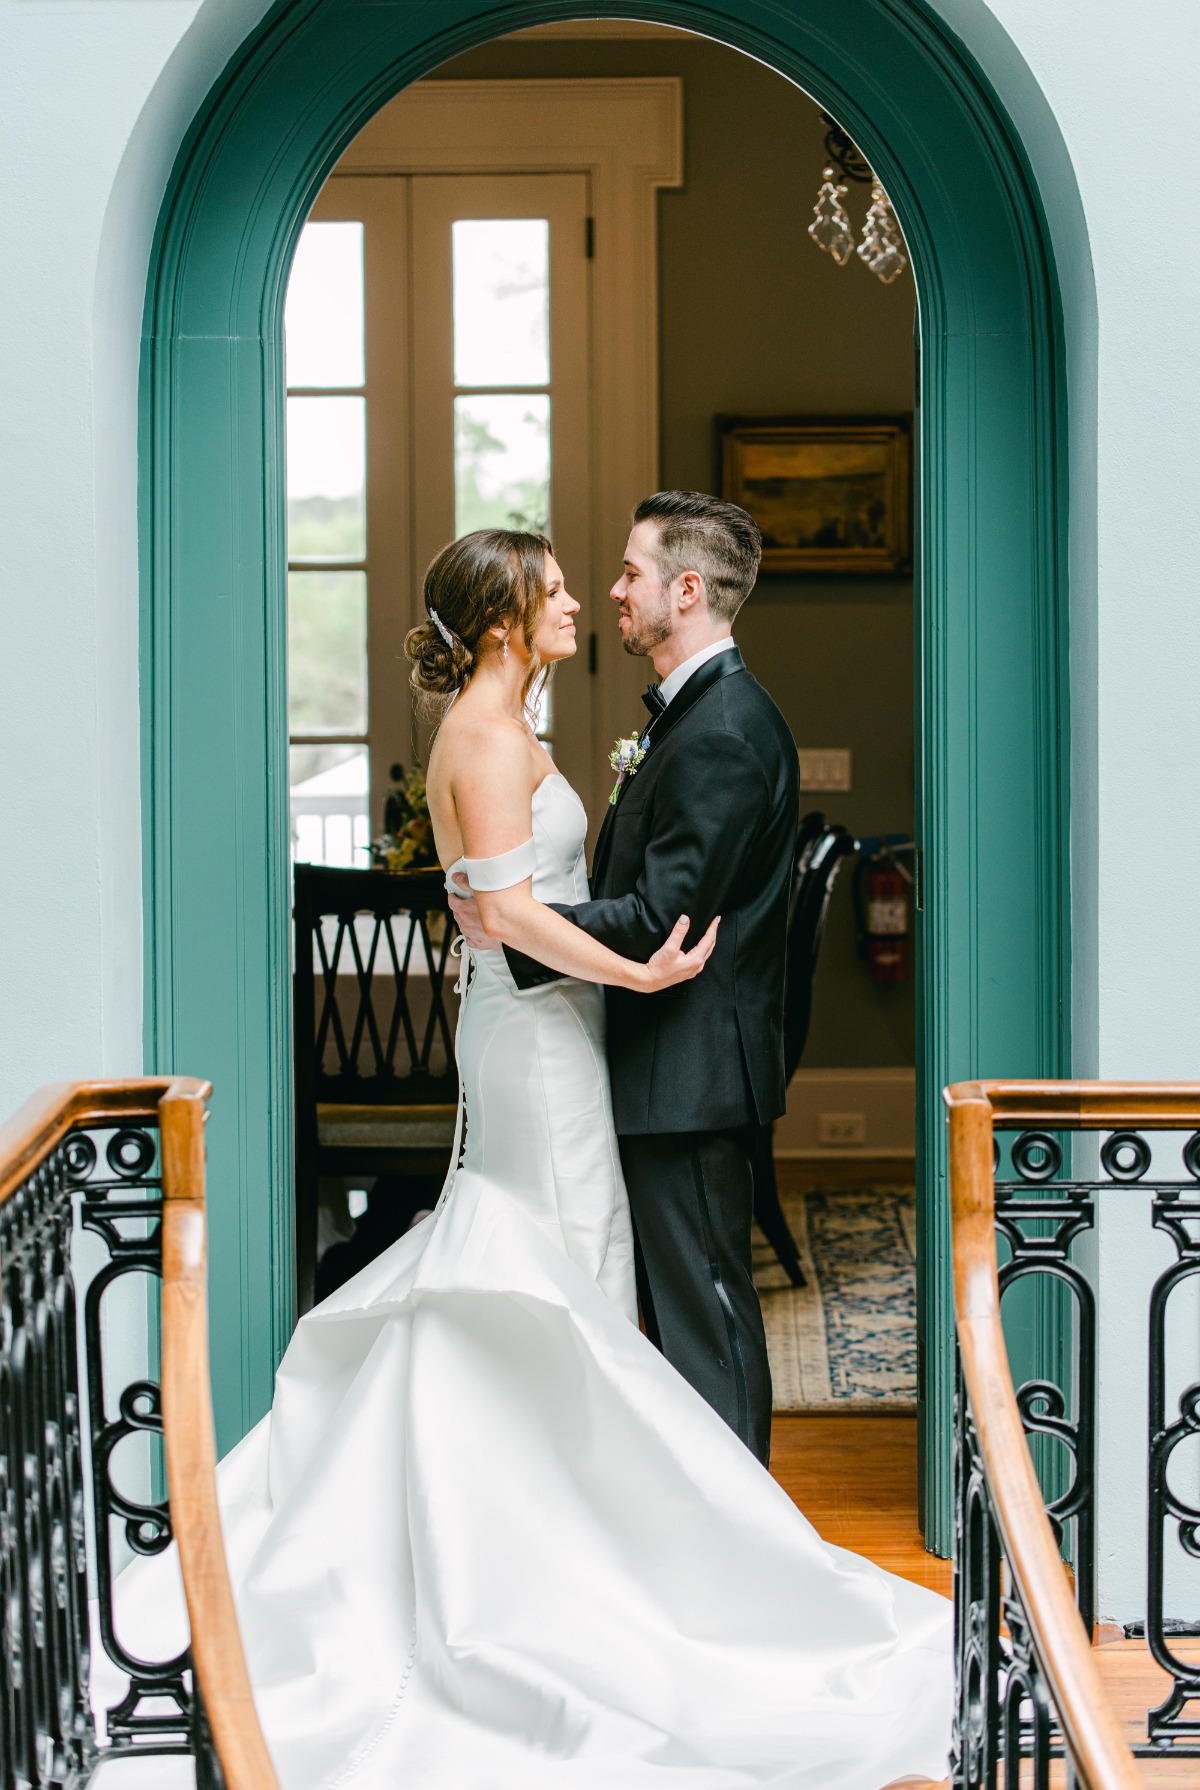 Portrait of bride and groom in front of teal arch